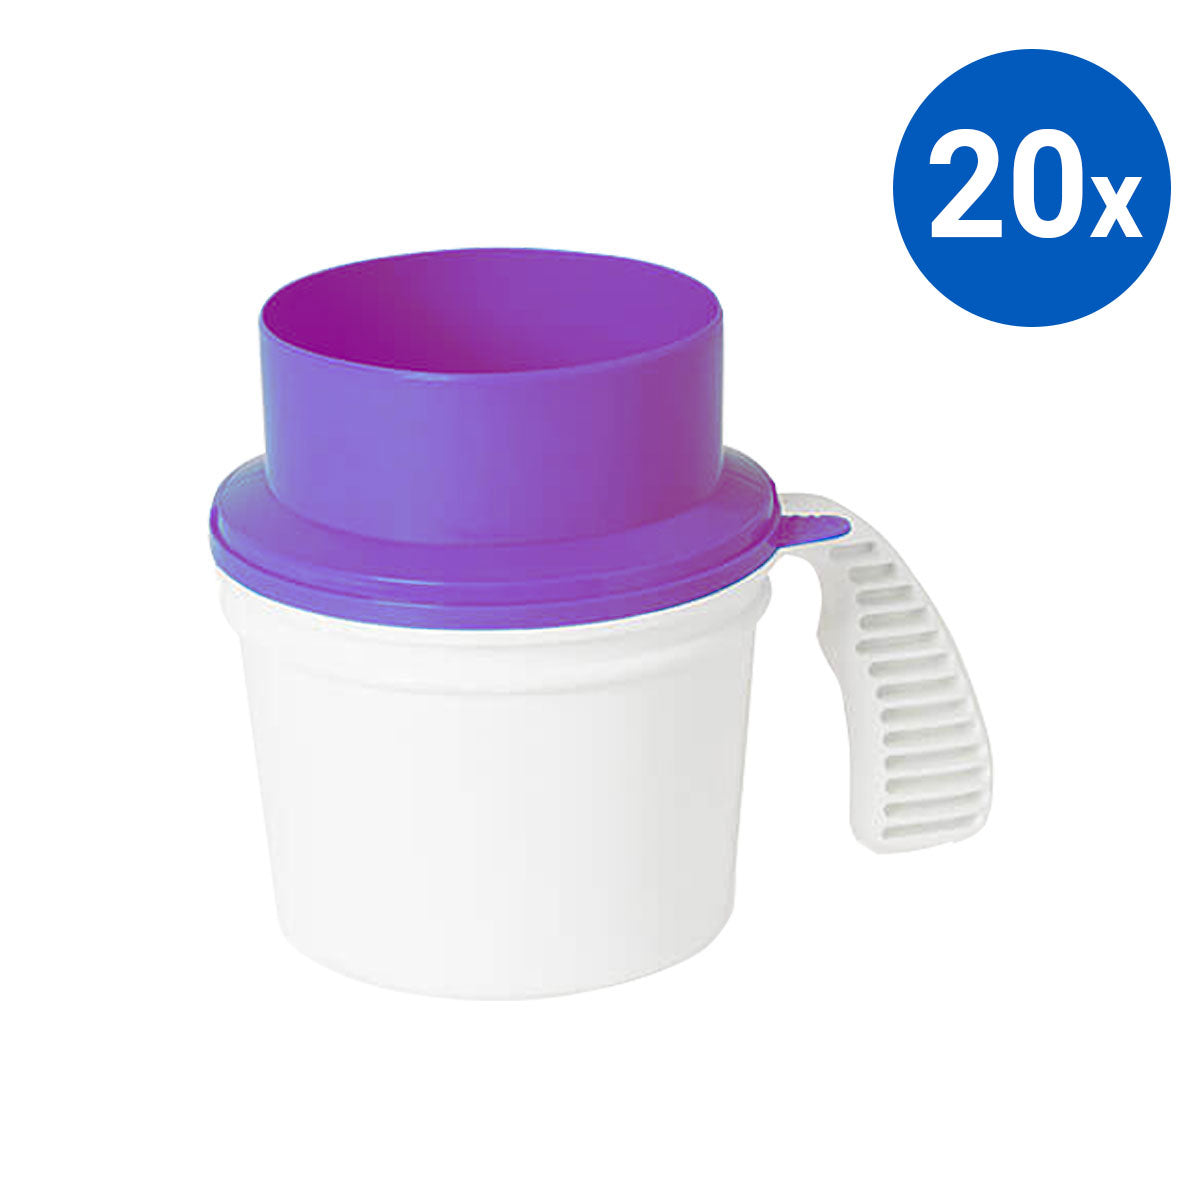 20x Collection Container Base and Quick Drop Lid - Purple